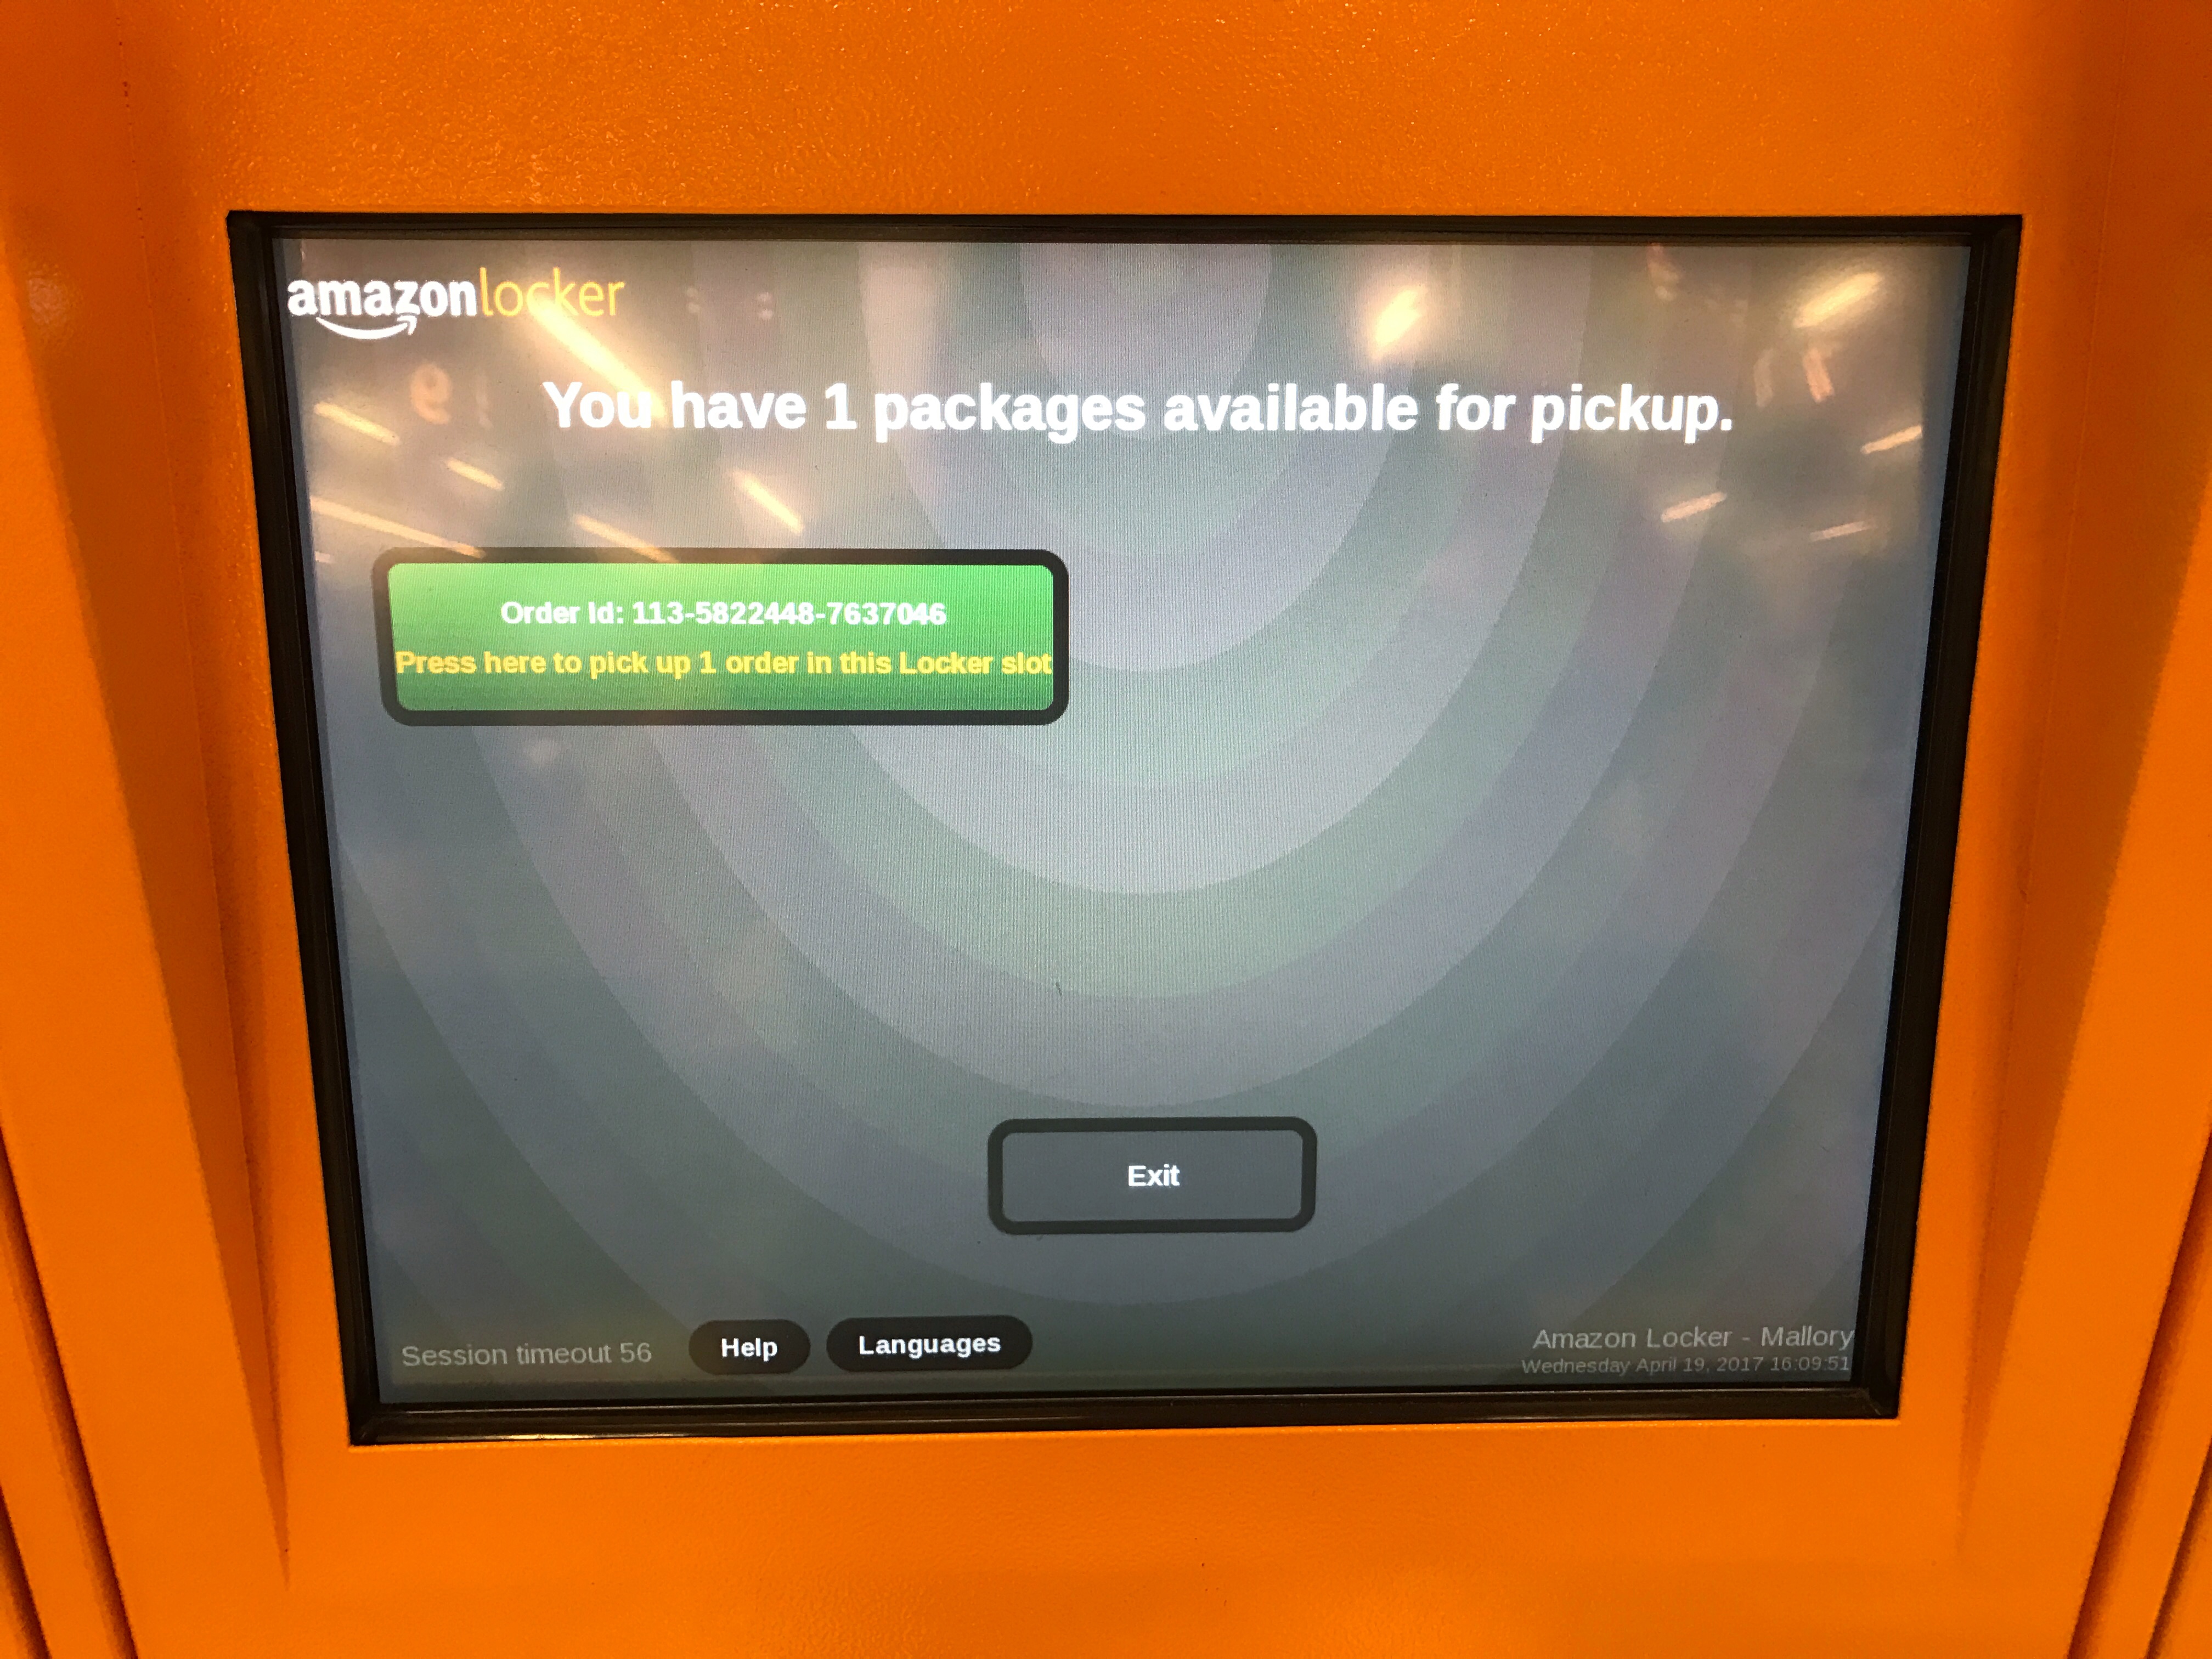 Detail view of Amazon locker kiosk to confirm and pick-up Amazon orders